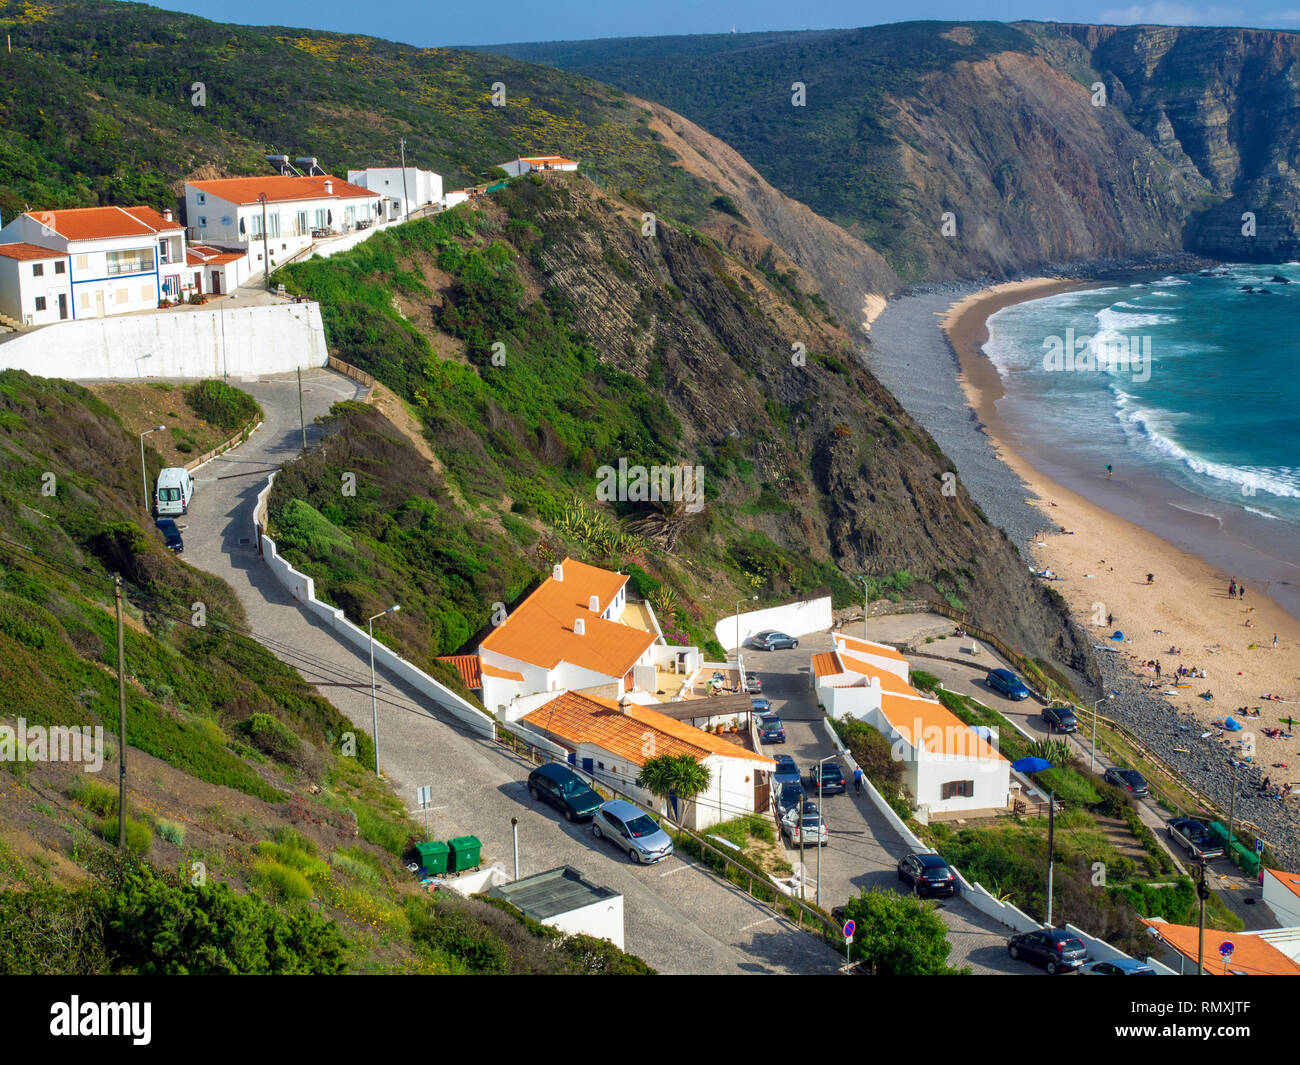 View over the beach in Arrifana, a small village popular with surfers on Portugal's south western coastline. Stock Photo